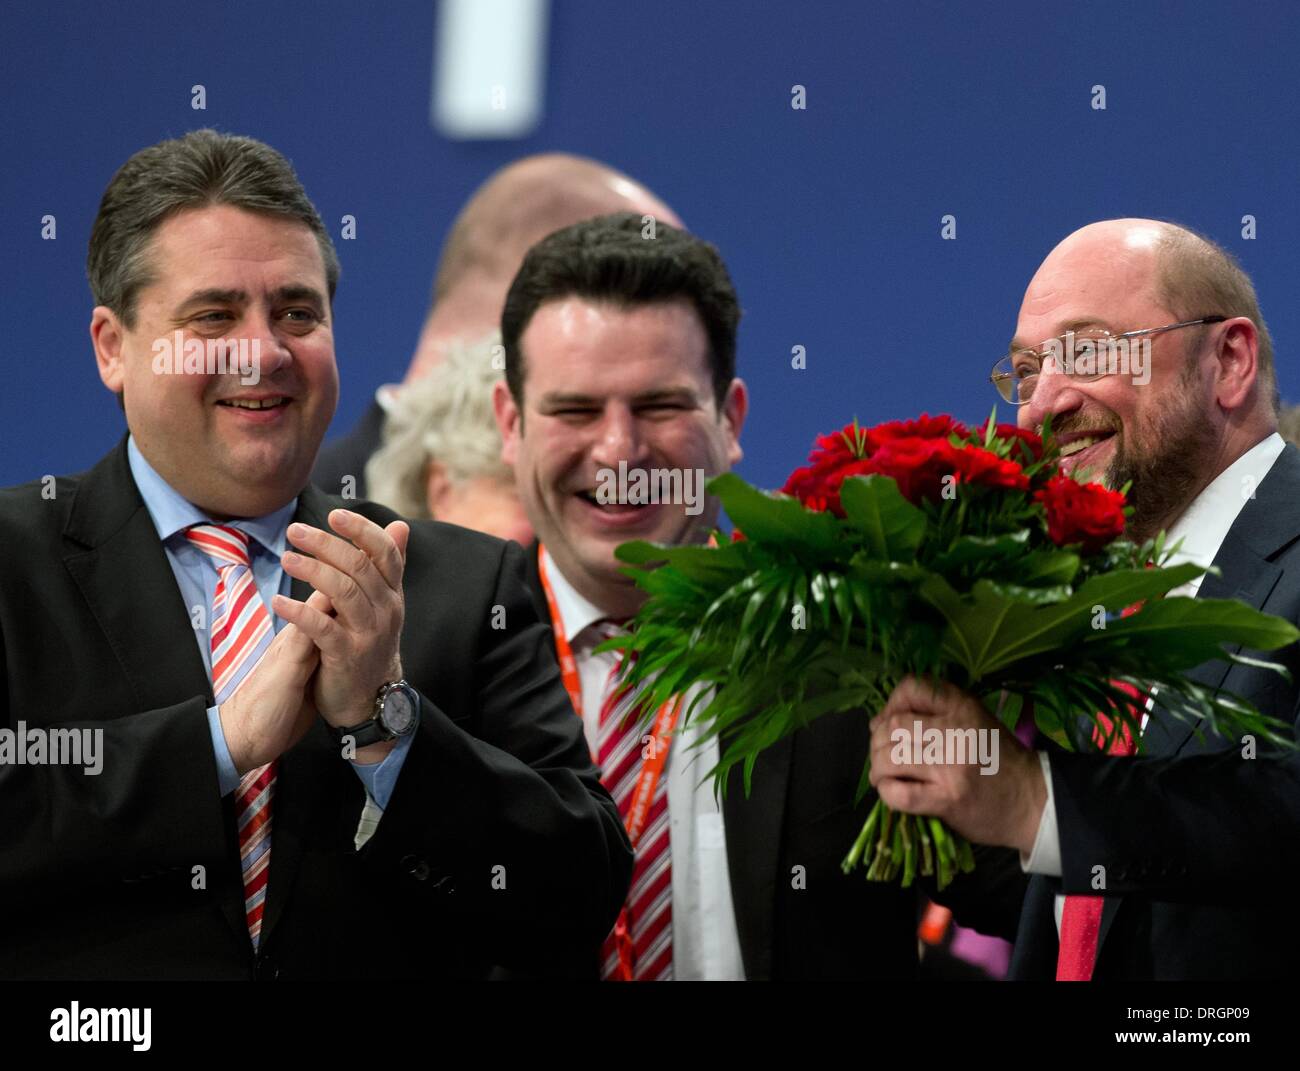 Berlin, Germany. 26th Jan, 2014. The newly elected SPD frontrunner and president of the European Parliament, Martin Schulz (SPD, C), accepts the congratulations of the chairman of the SPD, Sigmar Gabriel (L) and the vice party whip Hubertus Heil (C) during a meeting of the SPD's party executive committee in Berlin, Germany, 26 January 2014. The meeting was concerned with the forthcoming extraordinary general party conference of the SPD and the conference of the SPD's European delegates. Photo: Soeren Stache/dpa/Alamy Live News Stock Photo